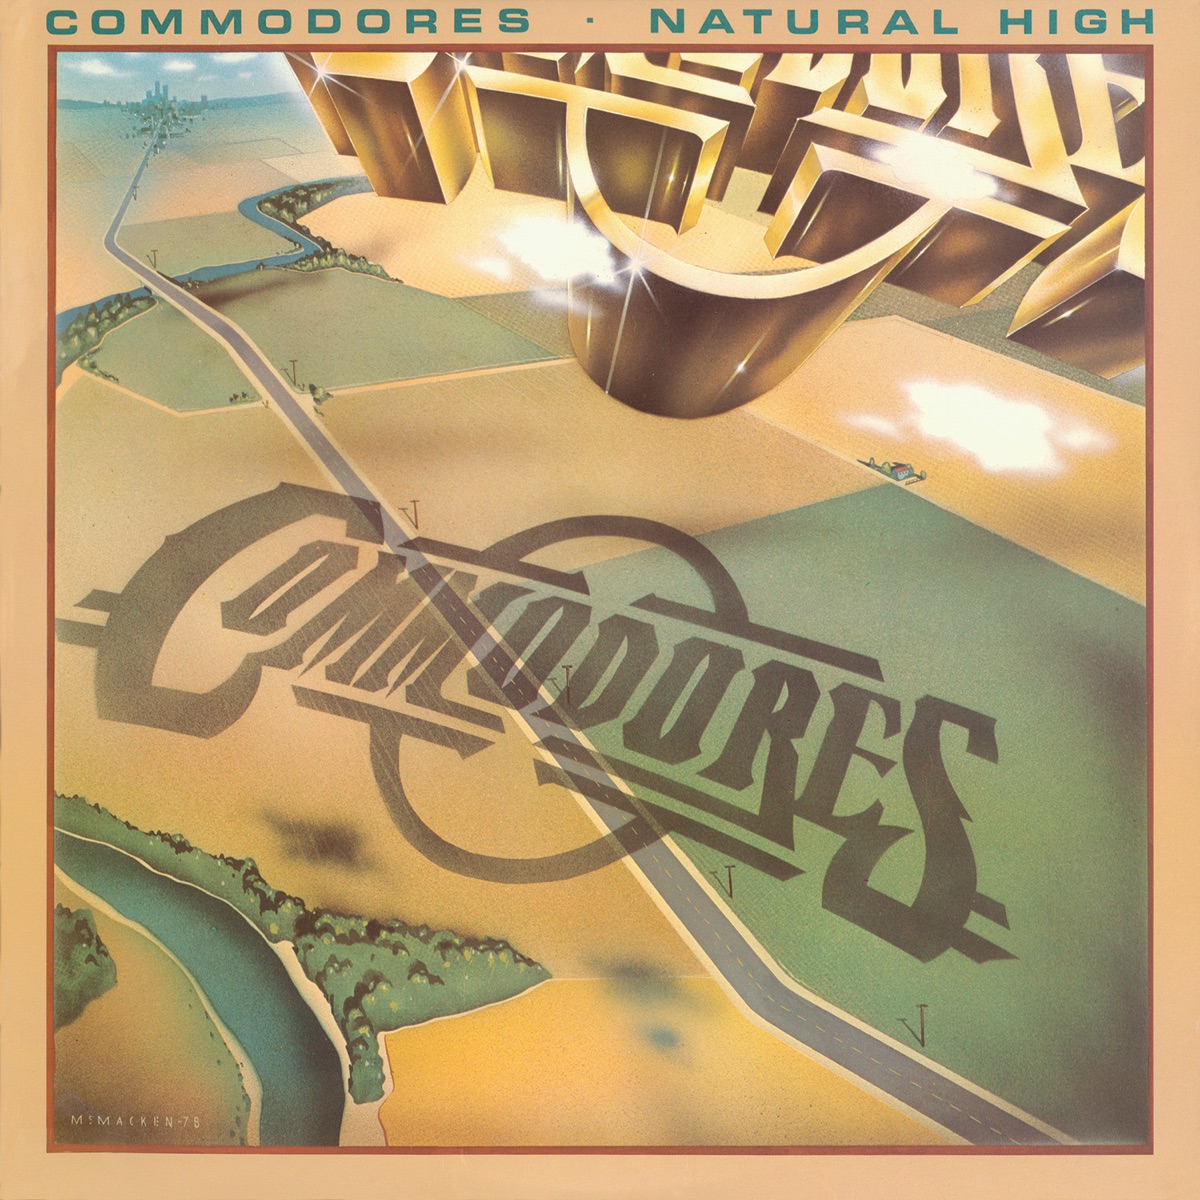 Nightshift - Album by The Commodores - Apple Music